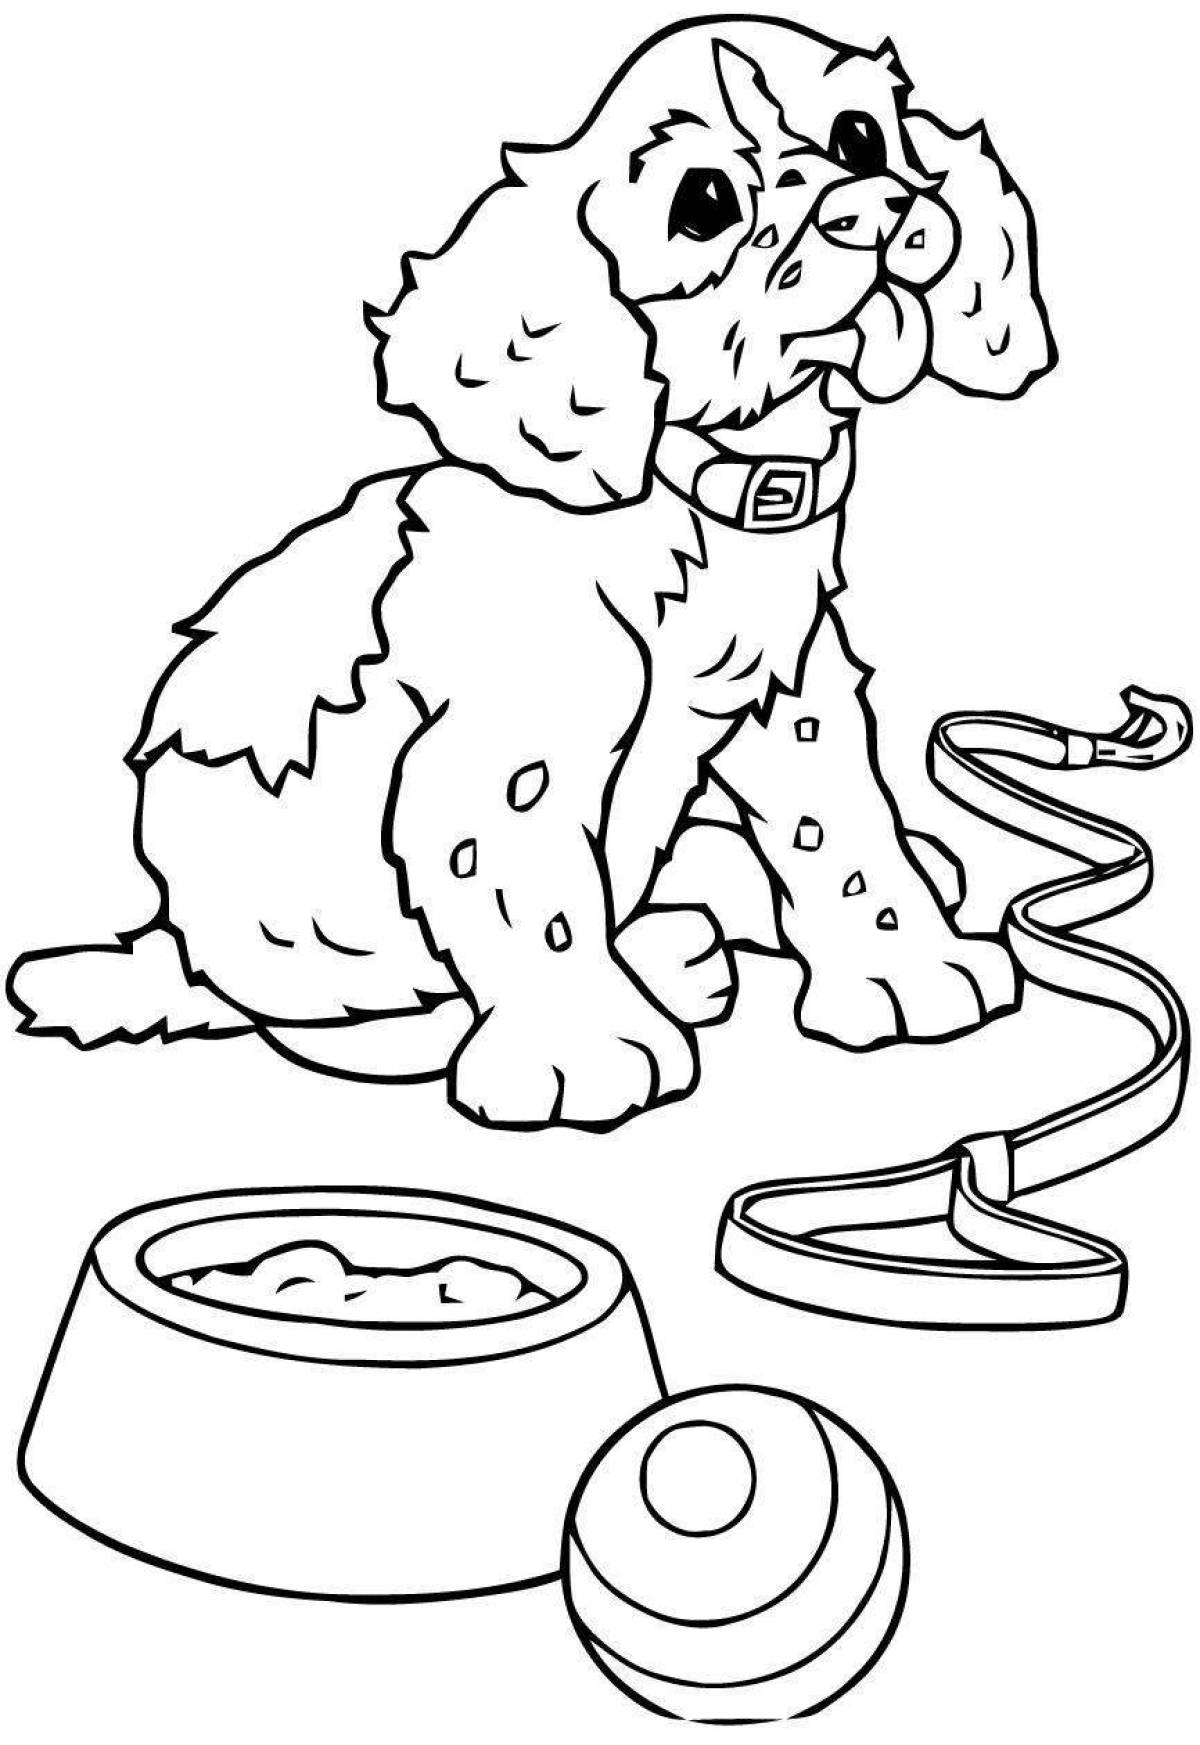 Cute coloring pages animals cats and dogs